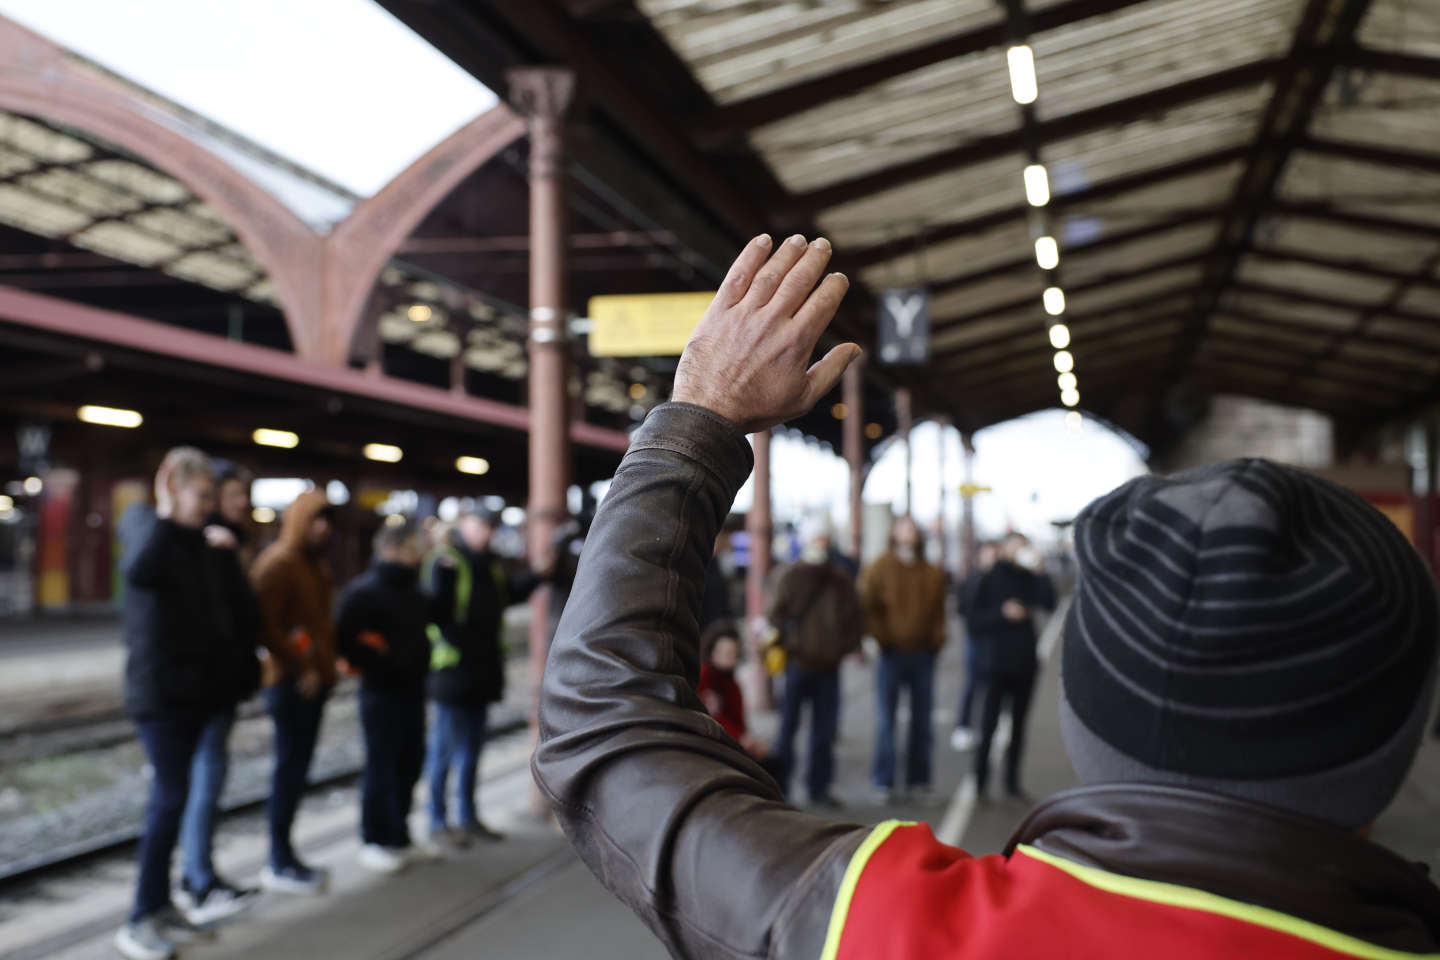 March 15 strike: SNCF plans three out of five TGVs and two out of five TERs on Wednesday